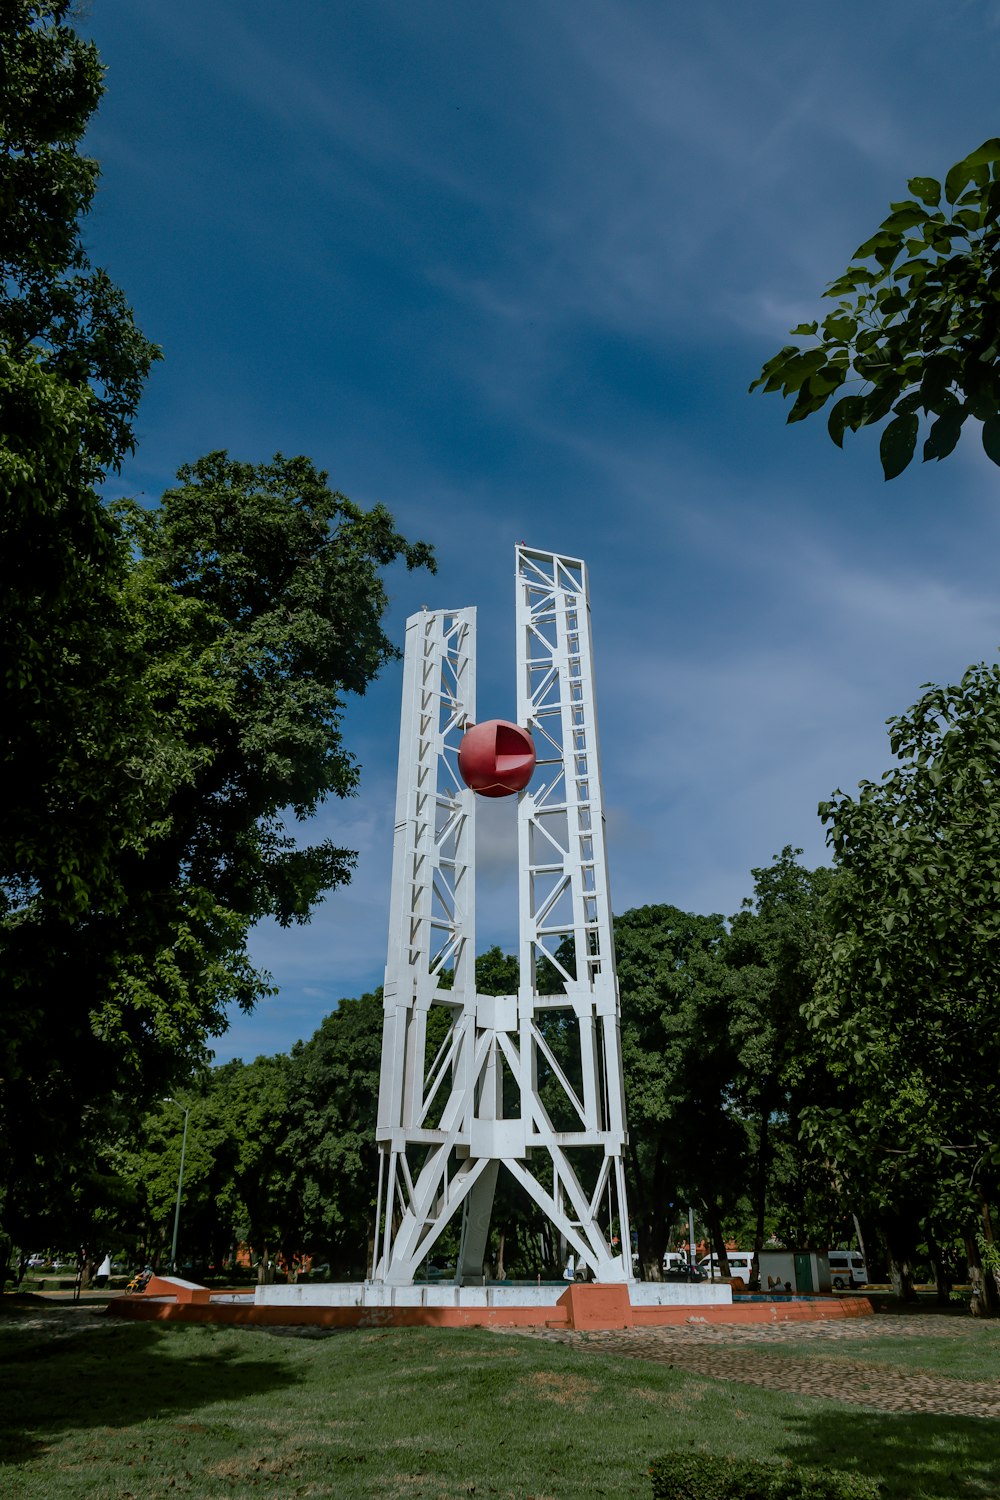 a tall white structure with a red ball on top of it